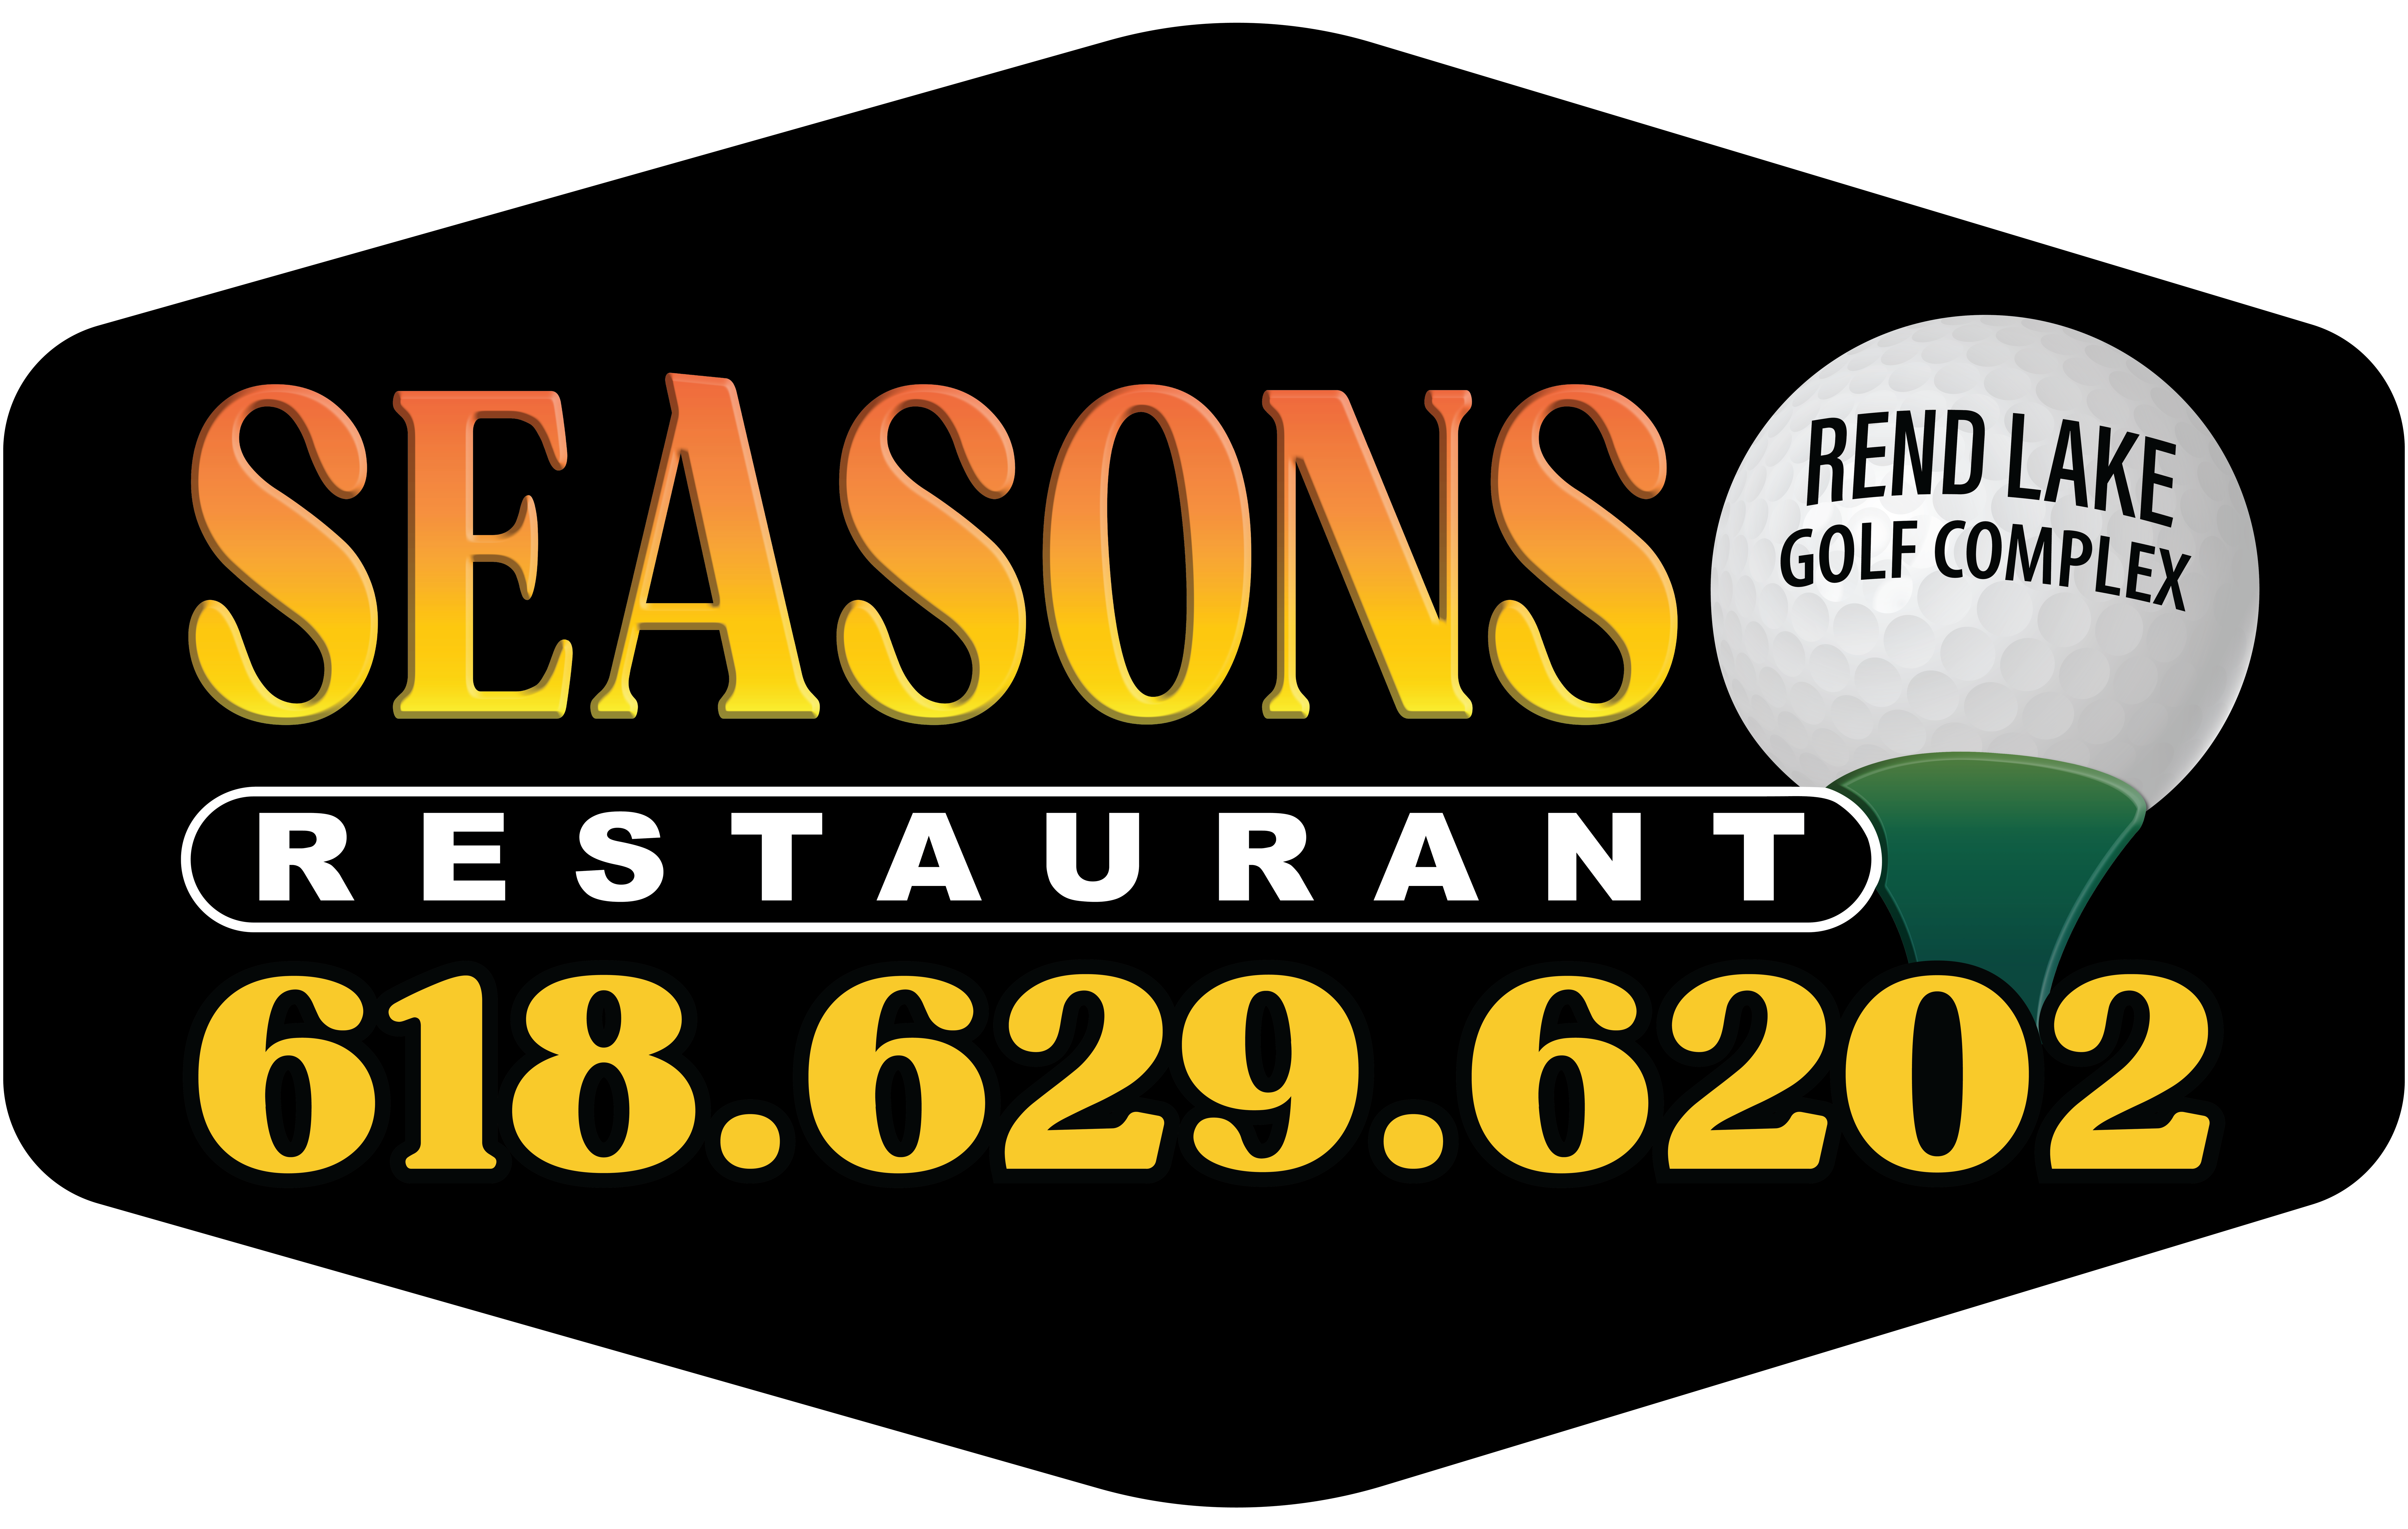 Seasons Restaurant Sign Cover Up PROOF-01 (002)